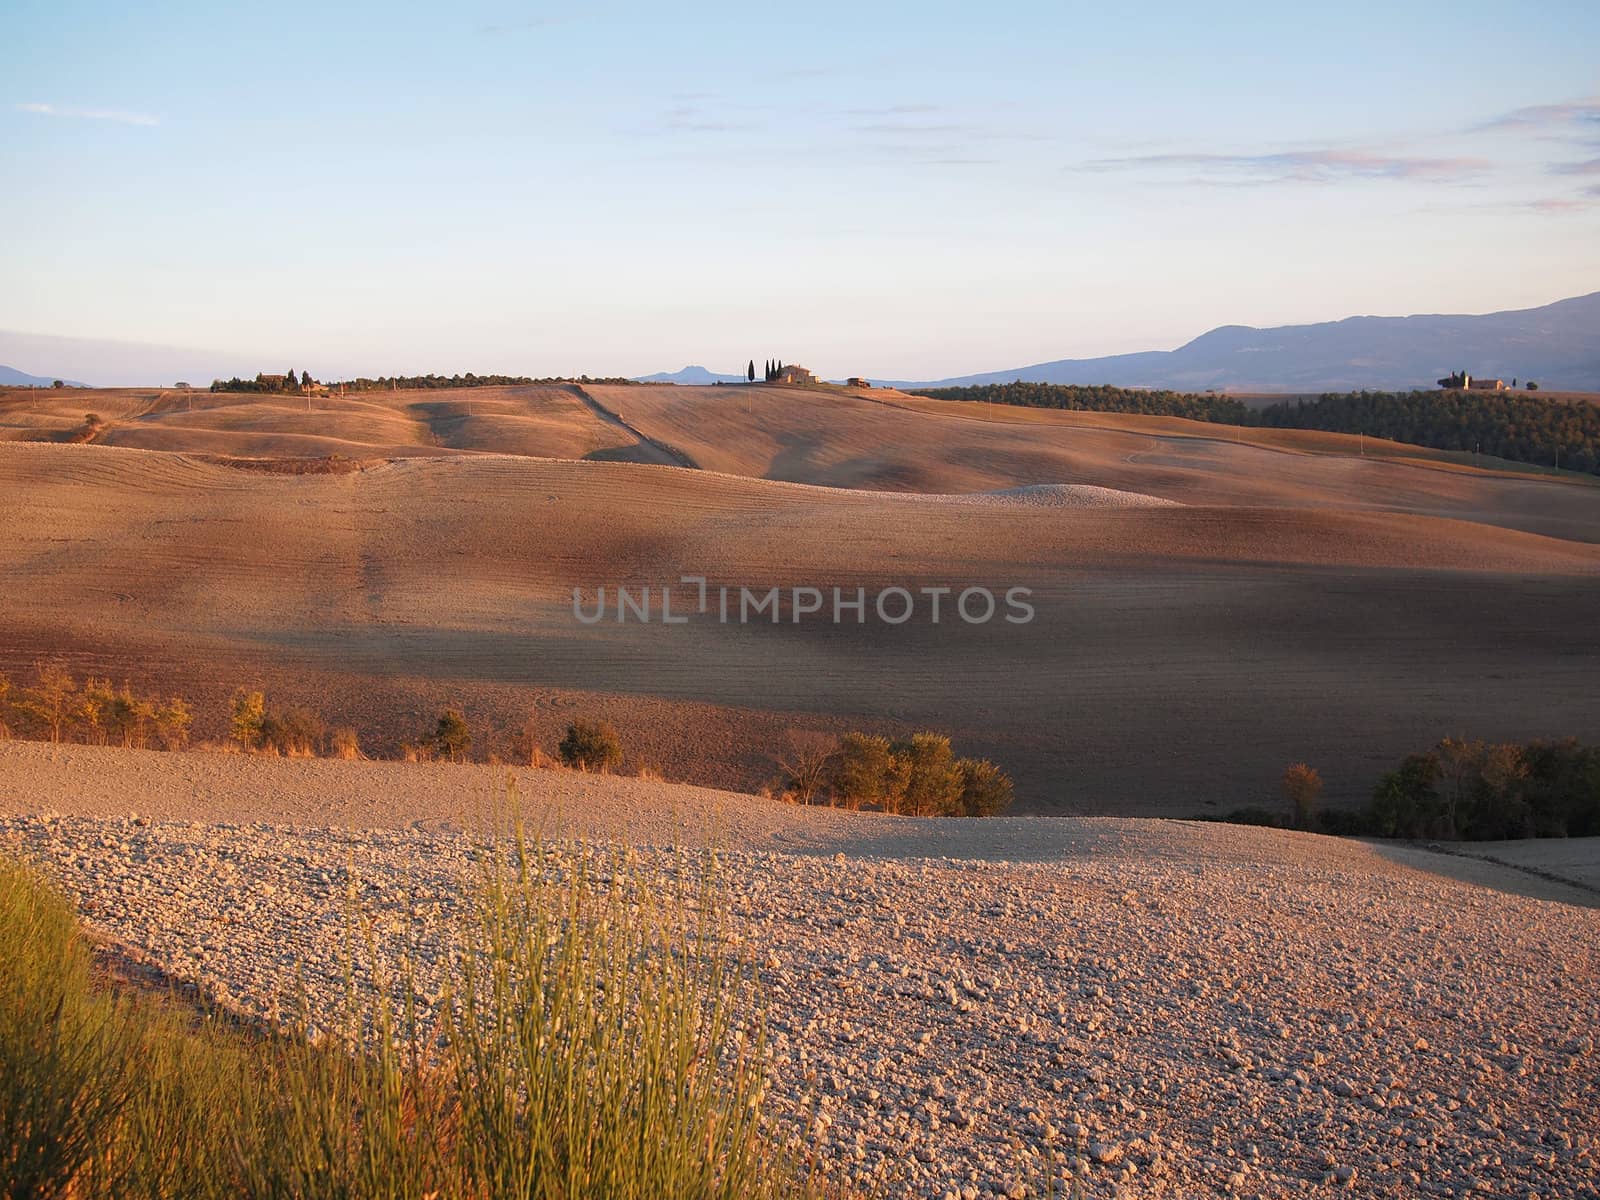 The typical barren hills of the Val d�Orcia in Tuscany, Italy in autumn.